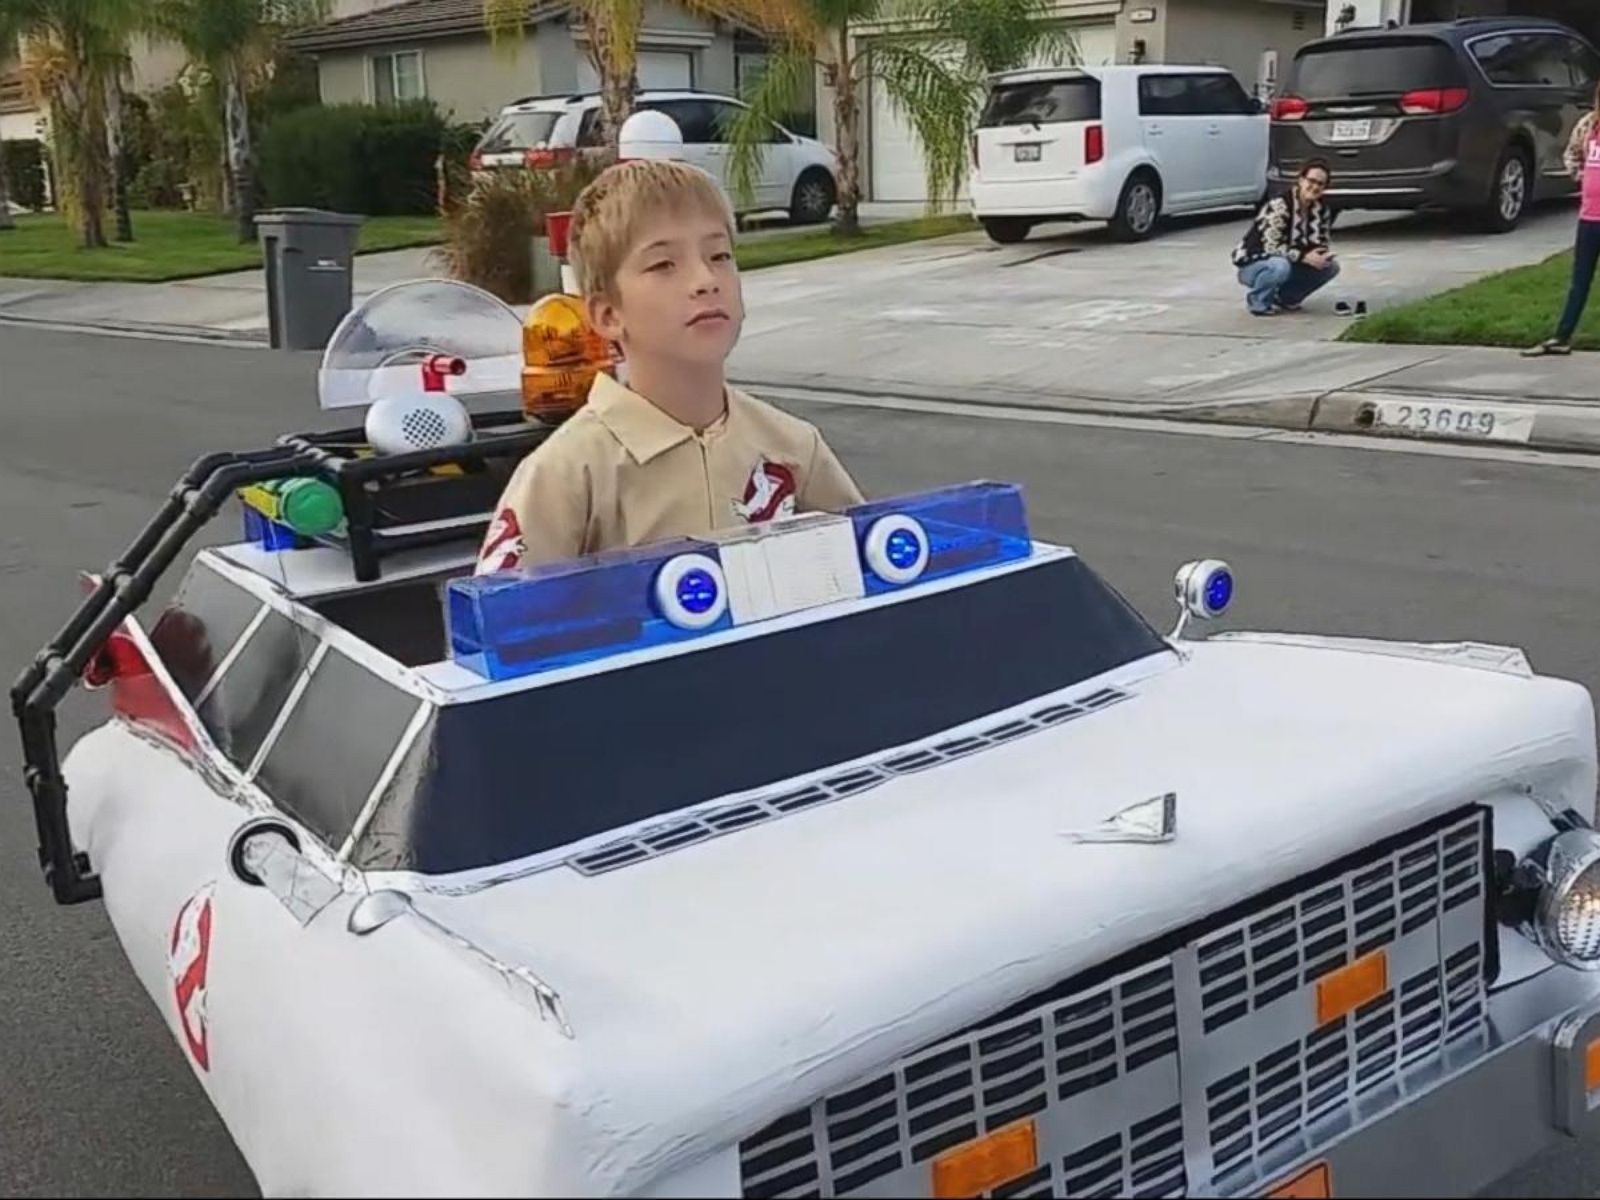 Ryan Scott Miller Is Known for Creating Special Halloween Costumes for His Son